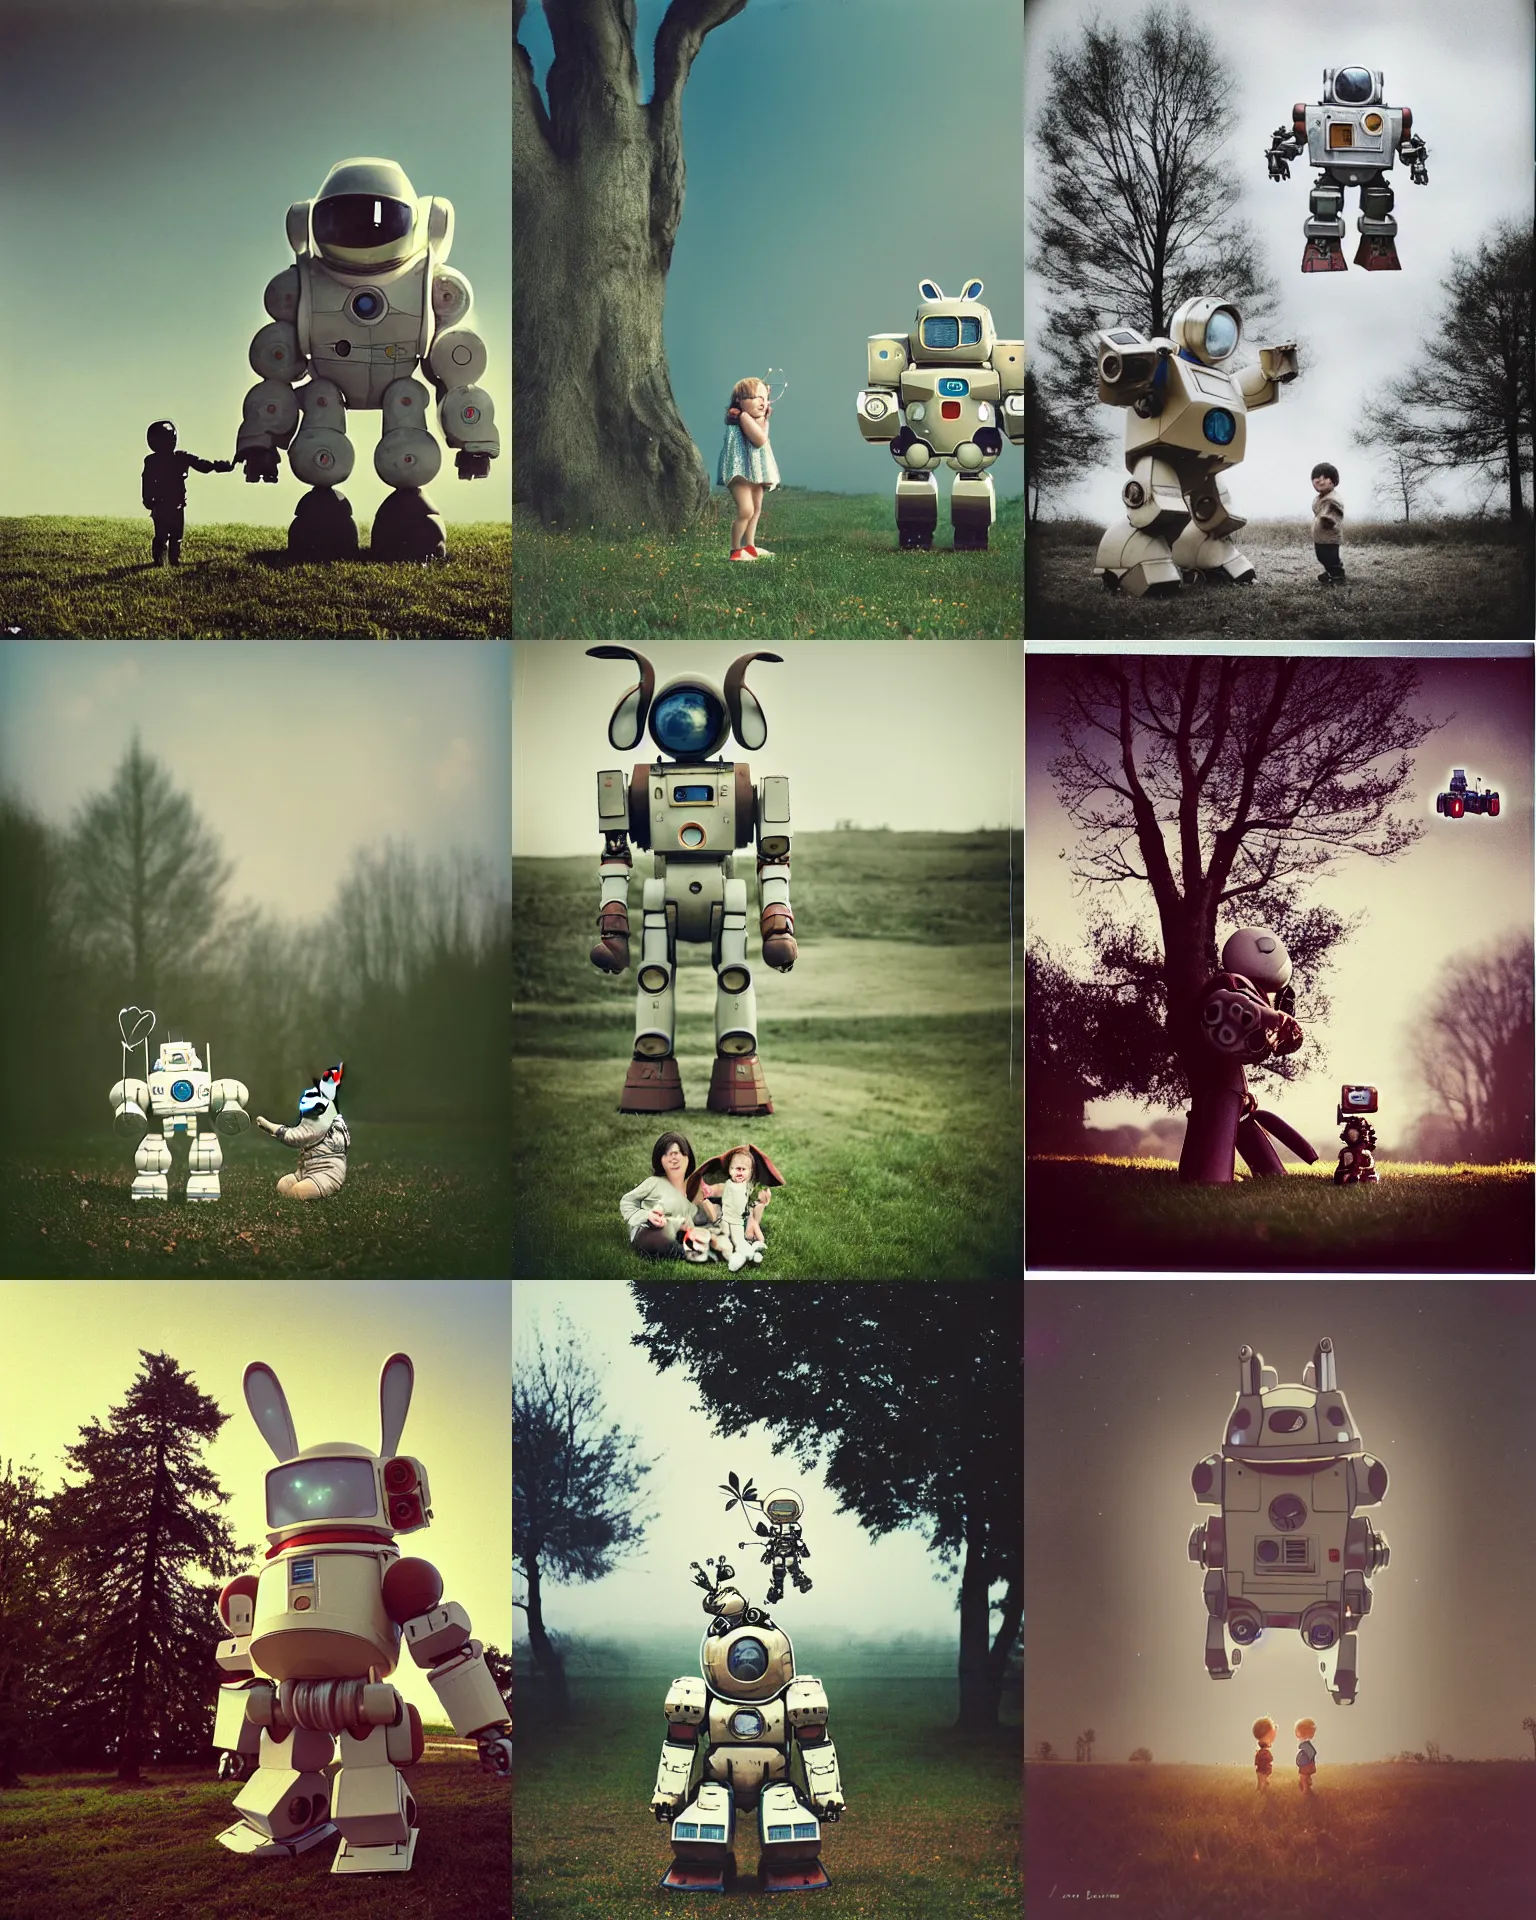 Prompt: giant oversized baby cute chubby battle robot mech with giant rabbit ears s as giant baby astronaut on village, Cinematic focus, small tree in far background, Polaroid photo, vintage, neutral colors, soft lights, foggy ,by Steve Hanks, by Serov Valentin, by lisa yuskavage, by Andrei Tarkovsky